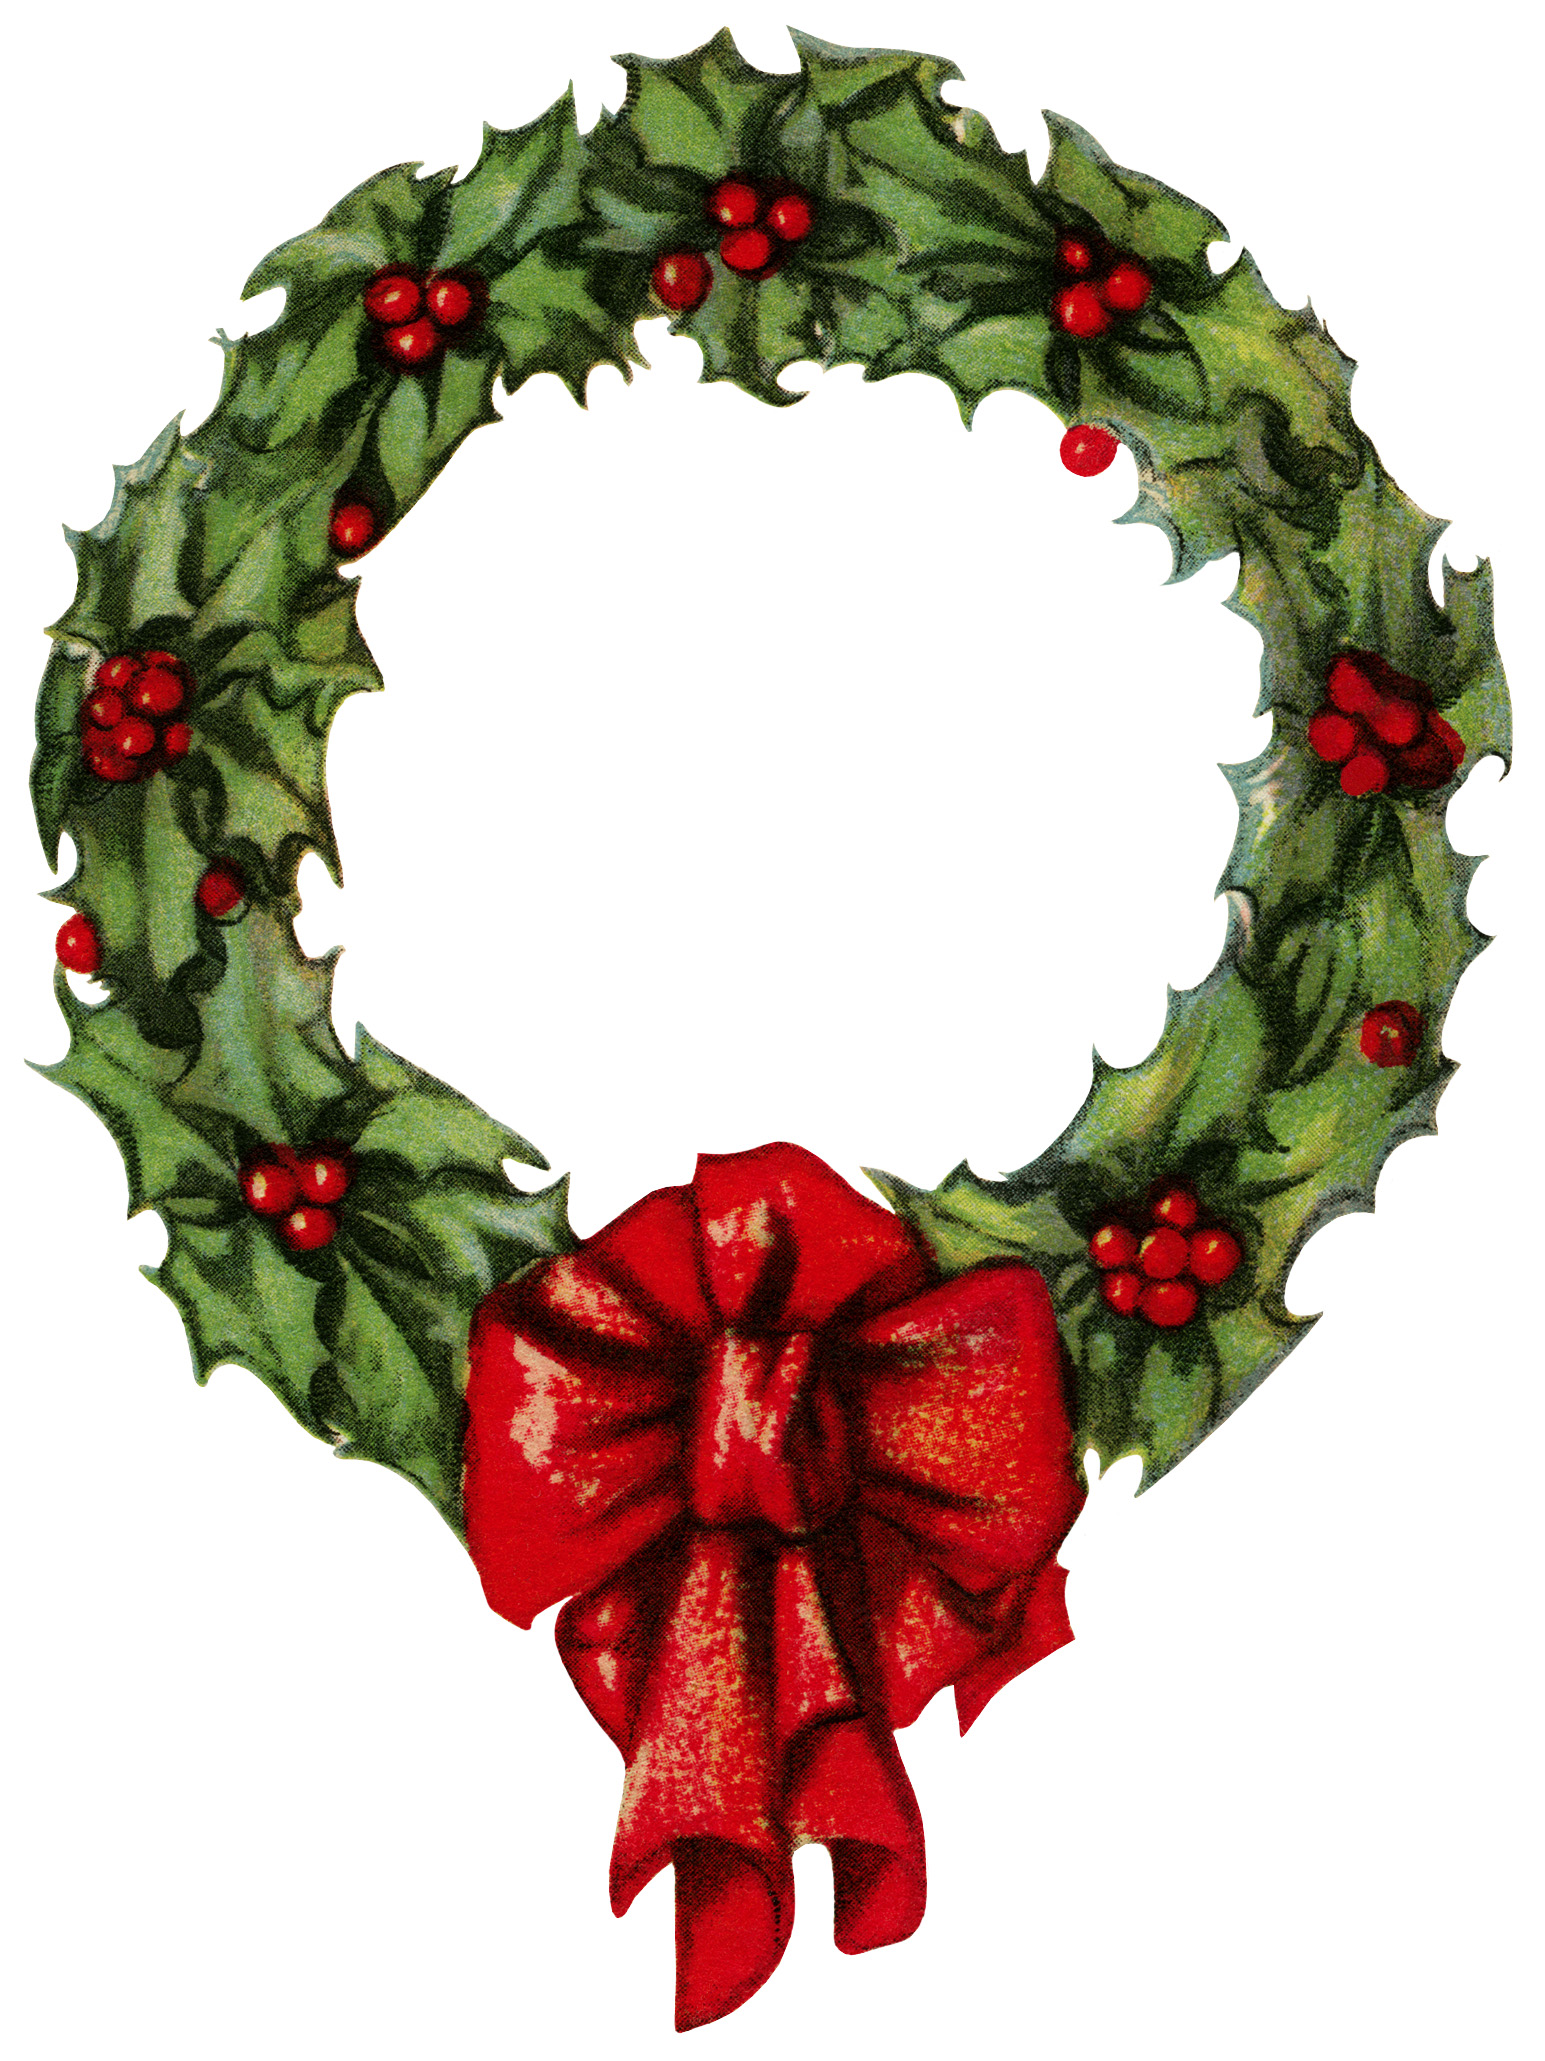 Holly and Berries Wreath ~ Free Vintage Graphic | Old Design Shop Blog